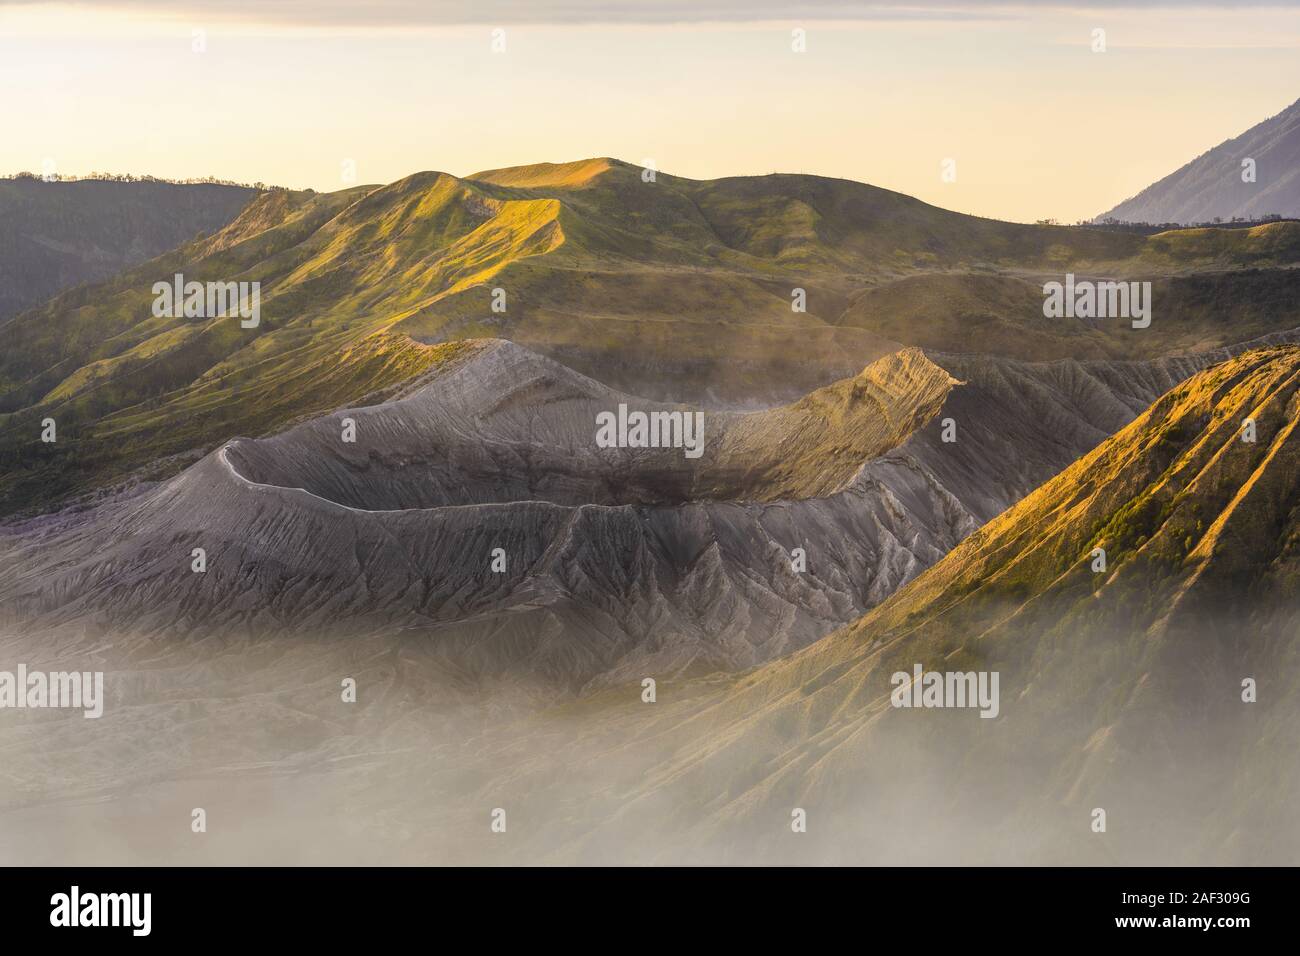 View from above, stunning close-up view of the Mount bromo crater and the Mount Batok surrounded by clouds during a beautiful sunrise. Stock Photo